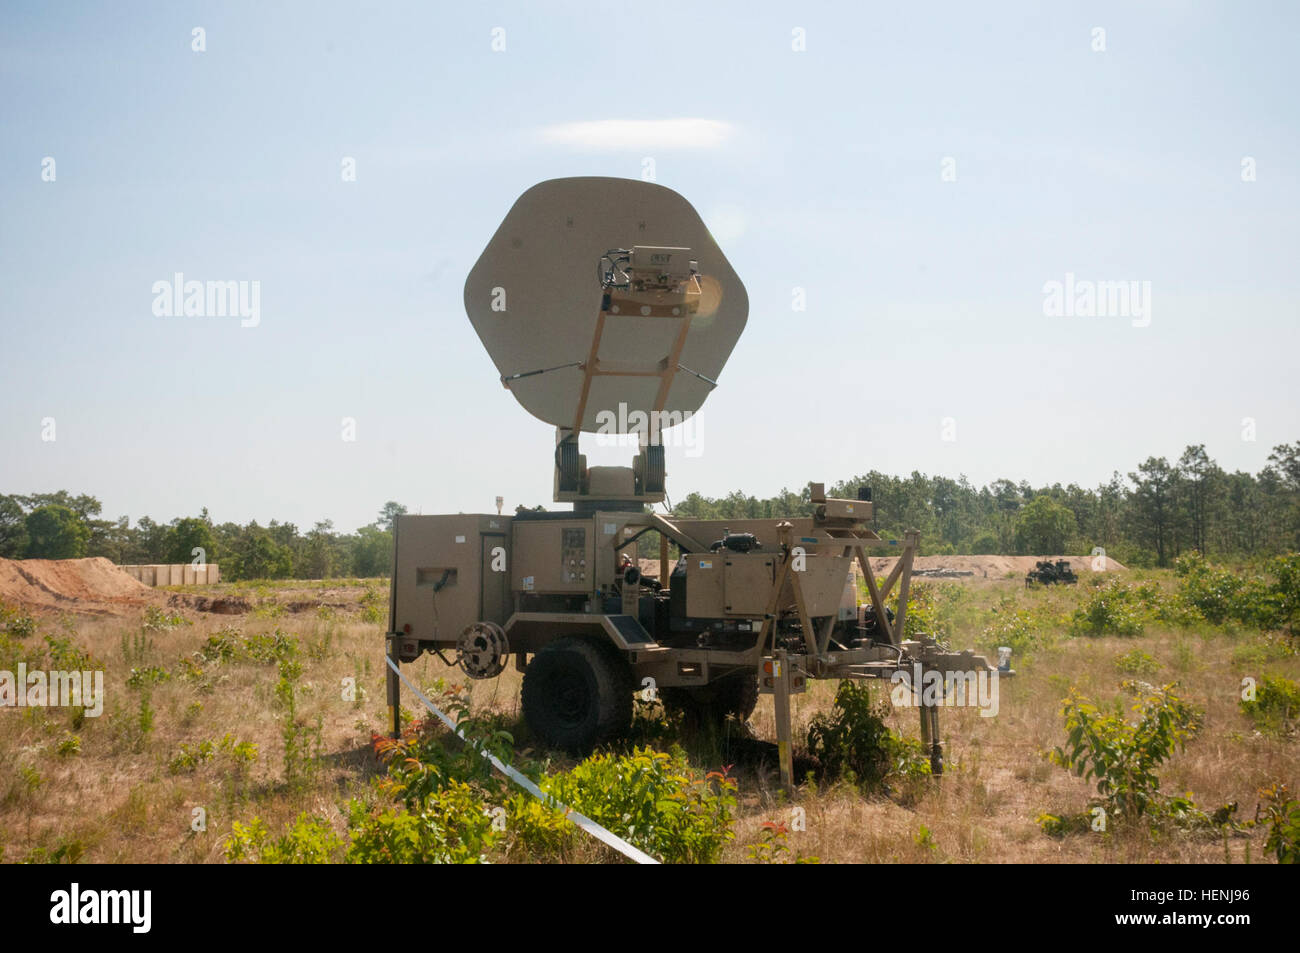 A satellite transportable terminal set up by the 558th Signal Company, from Maineville, Ohio sits behind the fuel farms during the 2014 Quartermaster Liquid Logistics Exercise (QLLEX), operationally controlled by 633rd Quartermaster Battalion, in Fort Bragg N.C., June 8 2014. (U.S. Army photo by Spc. Miguel Alvarez/Released) 2014 QLLEX 140608-A-DY471-001 Stock Photo